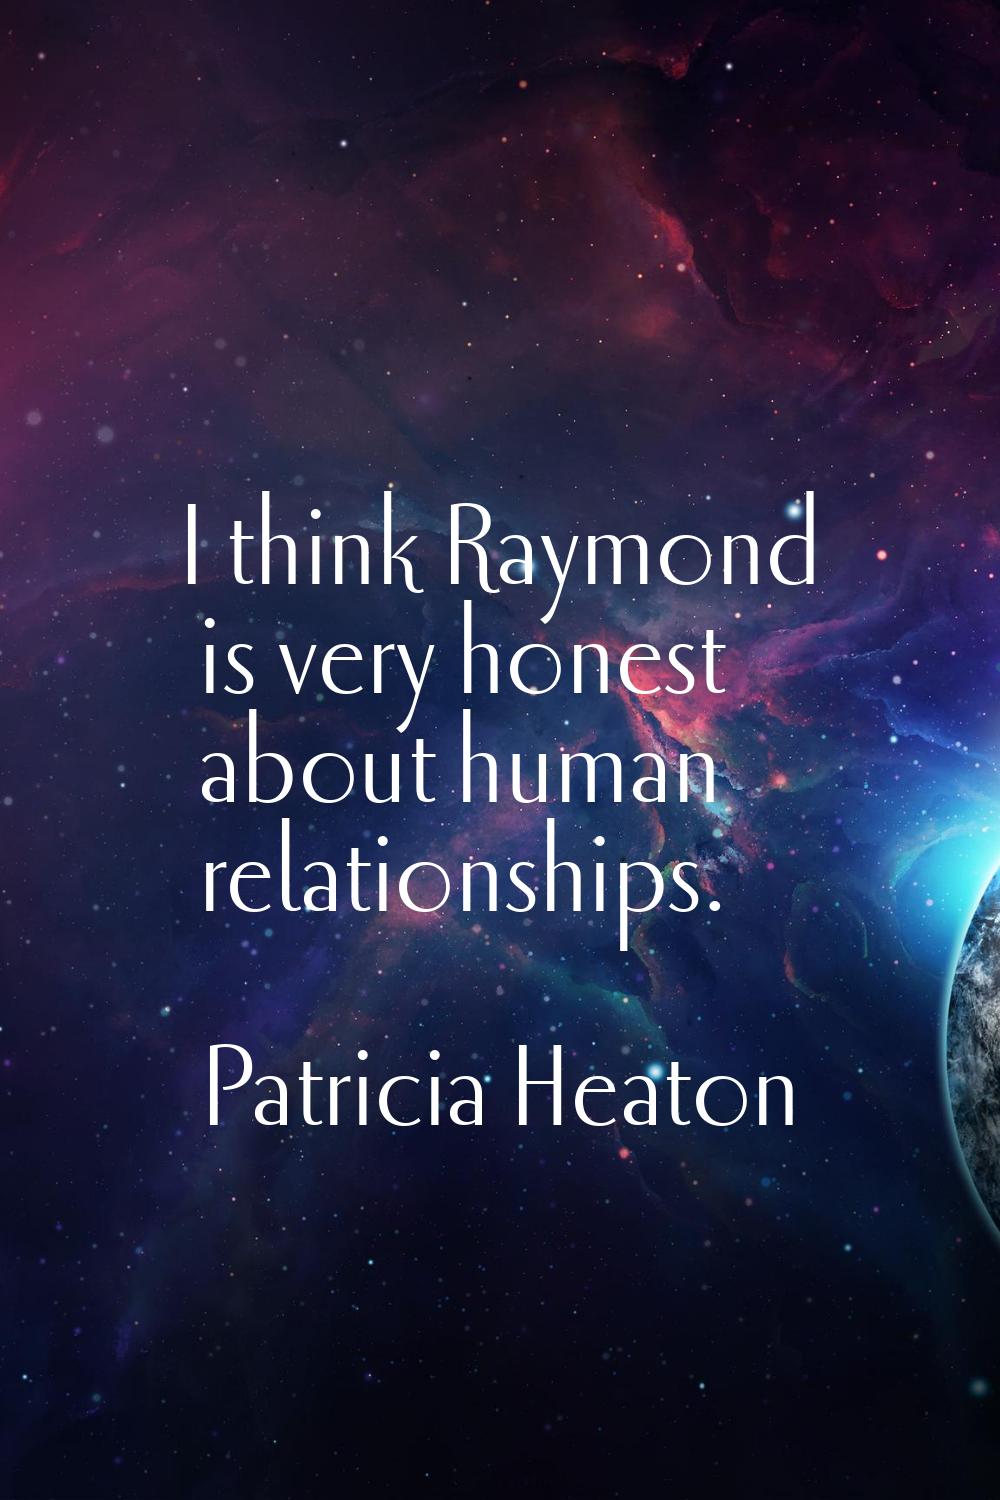 I think Raymond is very honest about human relationships.